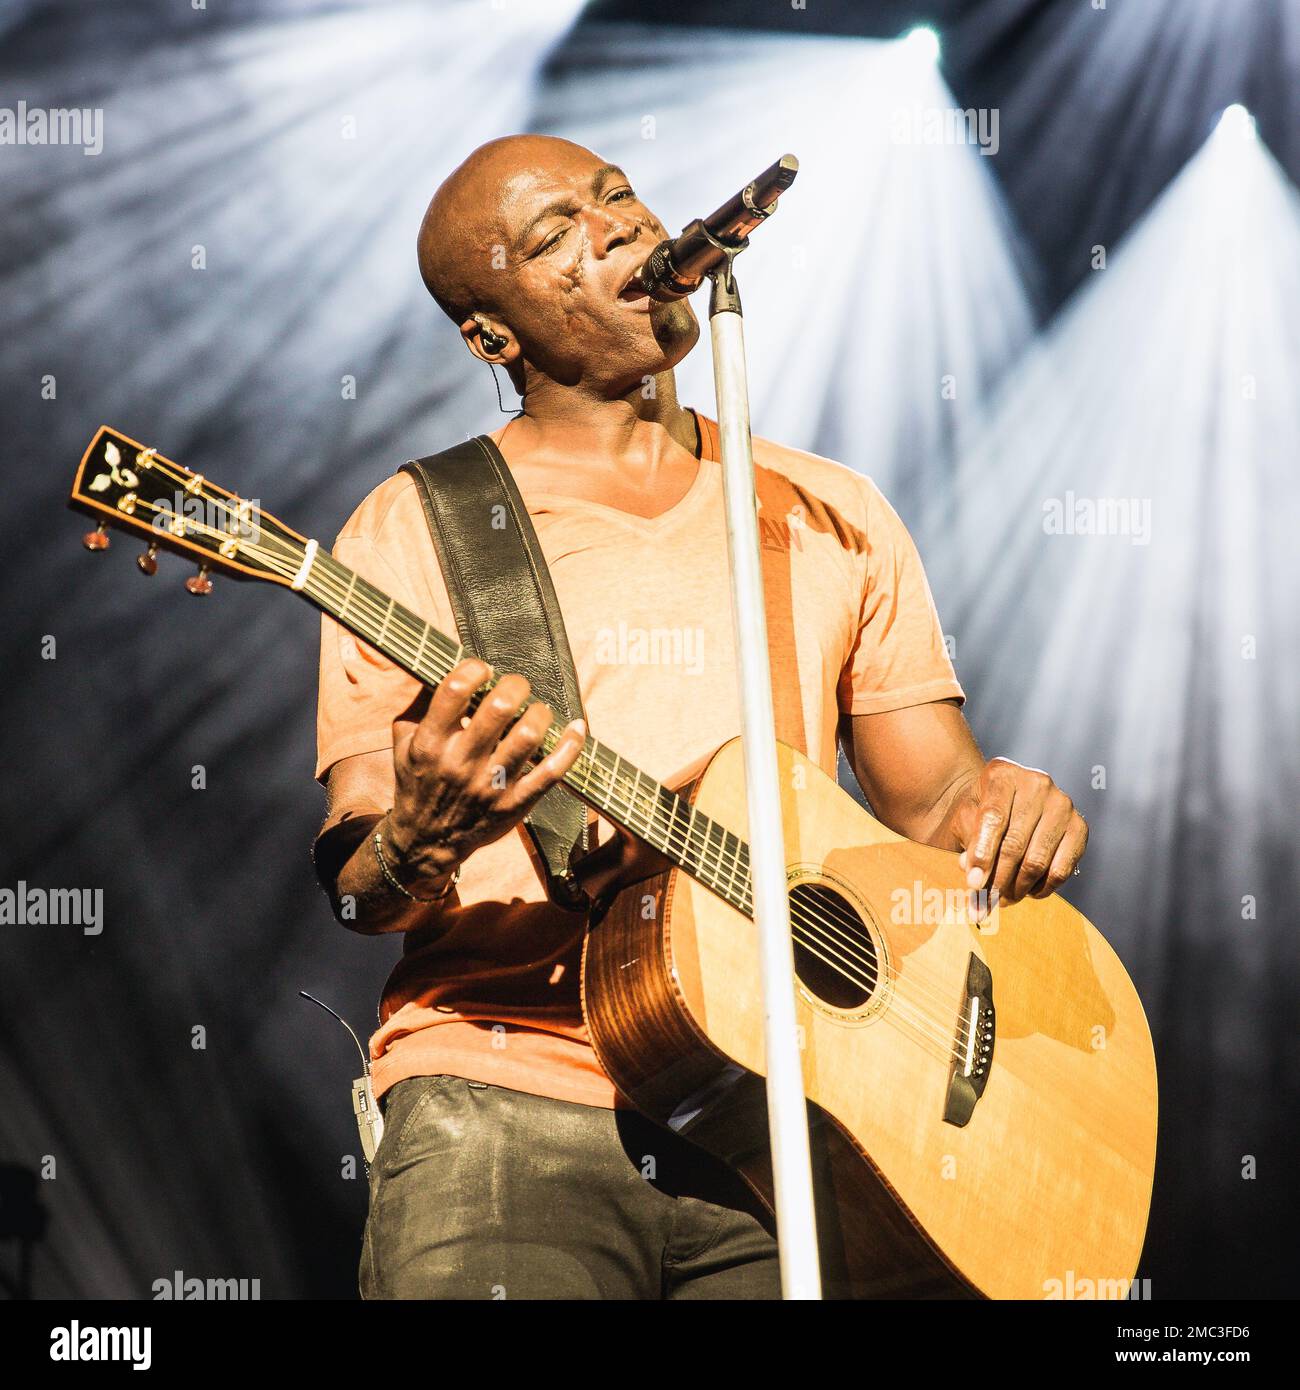 Singer Seal performing live on stage Stock Photo